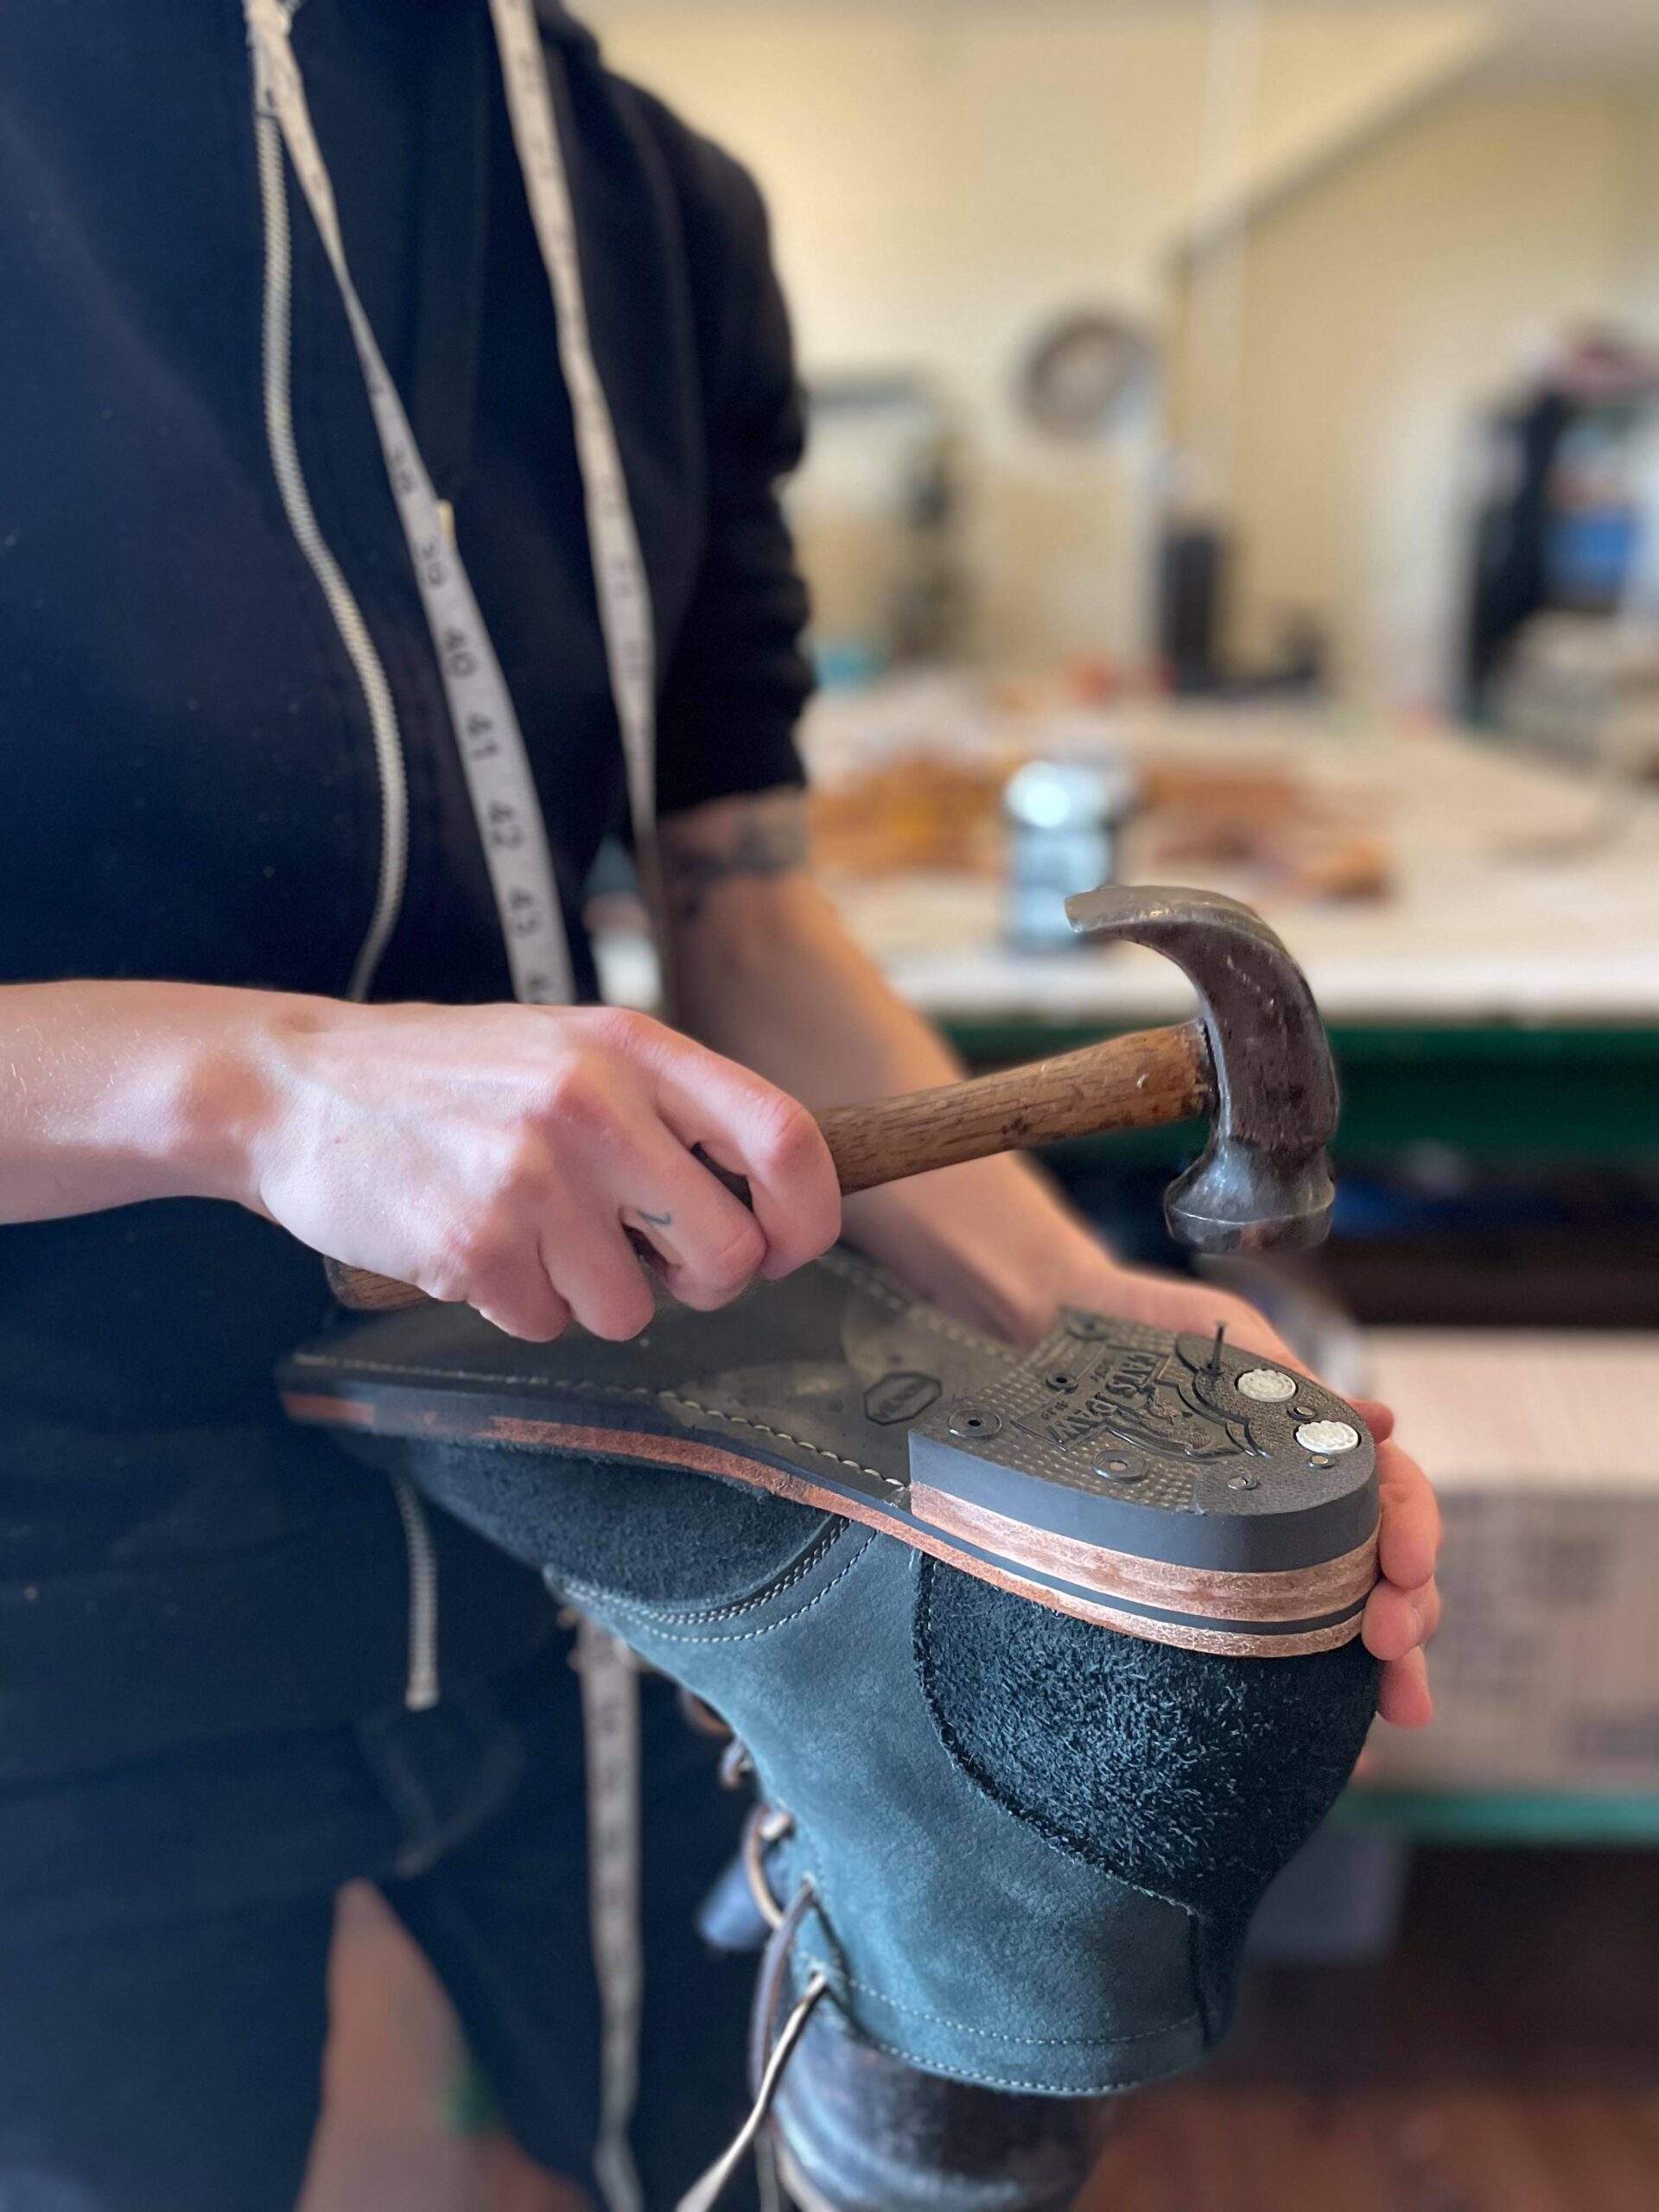 Ariss performing some shoe repairs on a boot heel, by nails